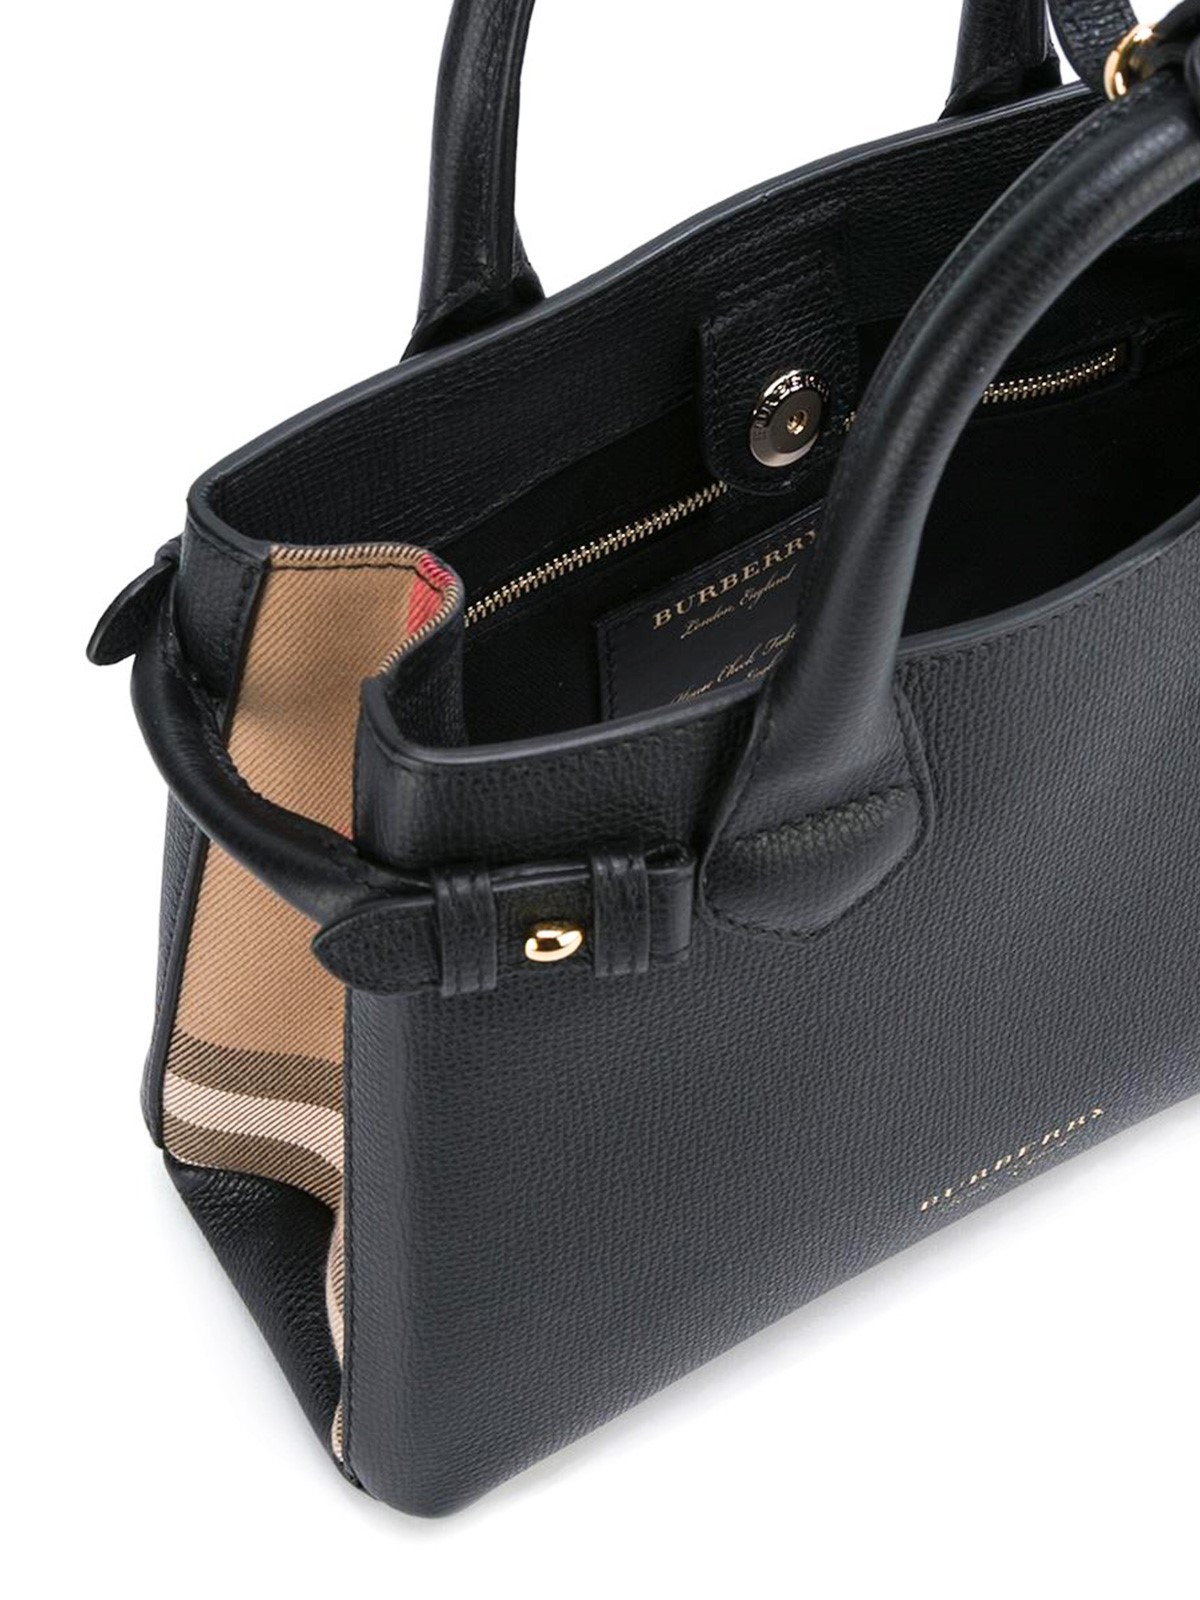 burberry banner tote bag